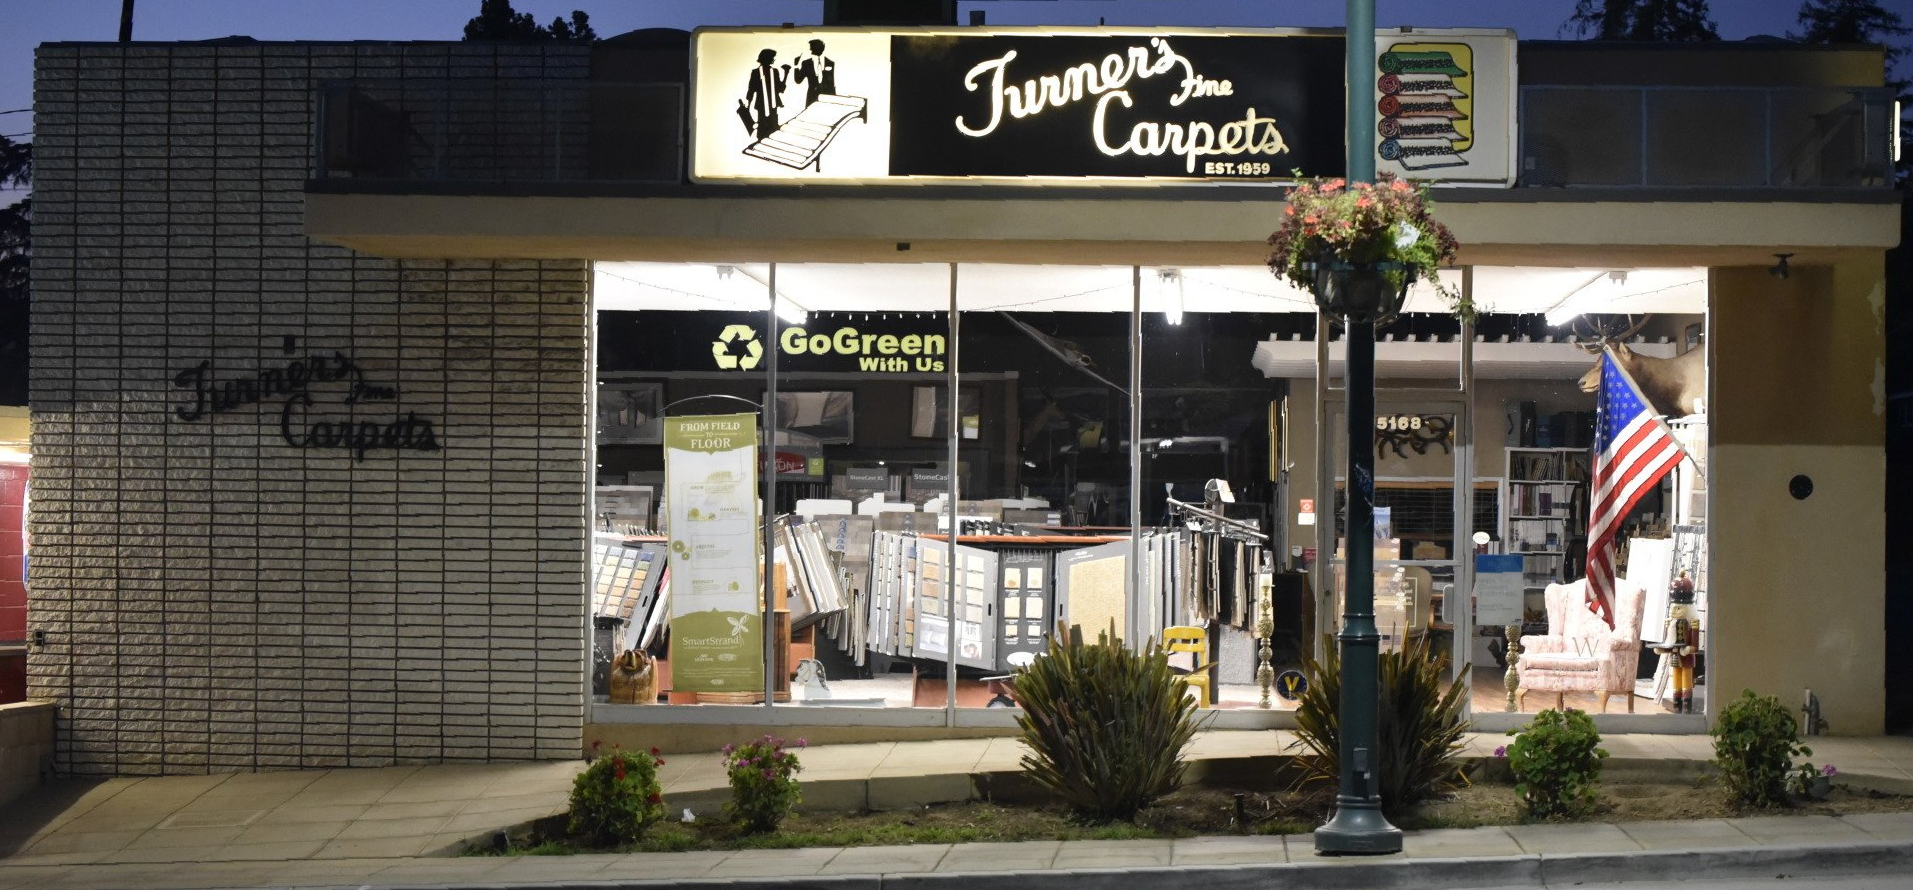 Color photo of Turner's Carpets flooring store in Yucaipa CA Looking in showroom at night